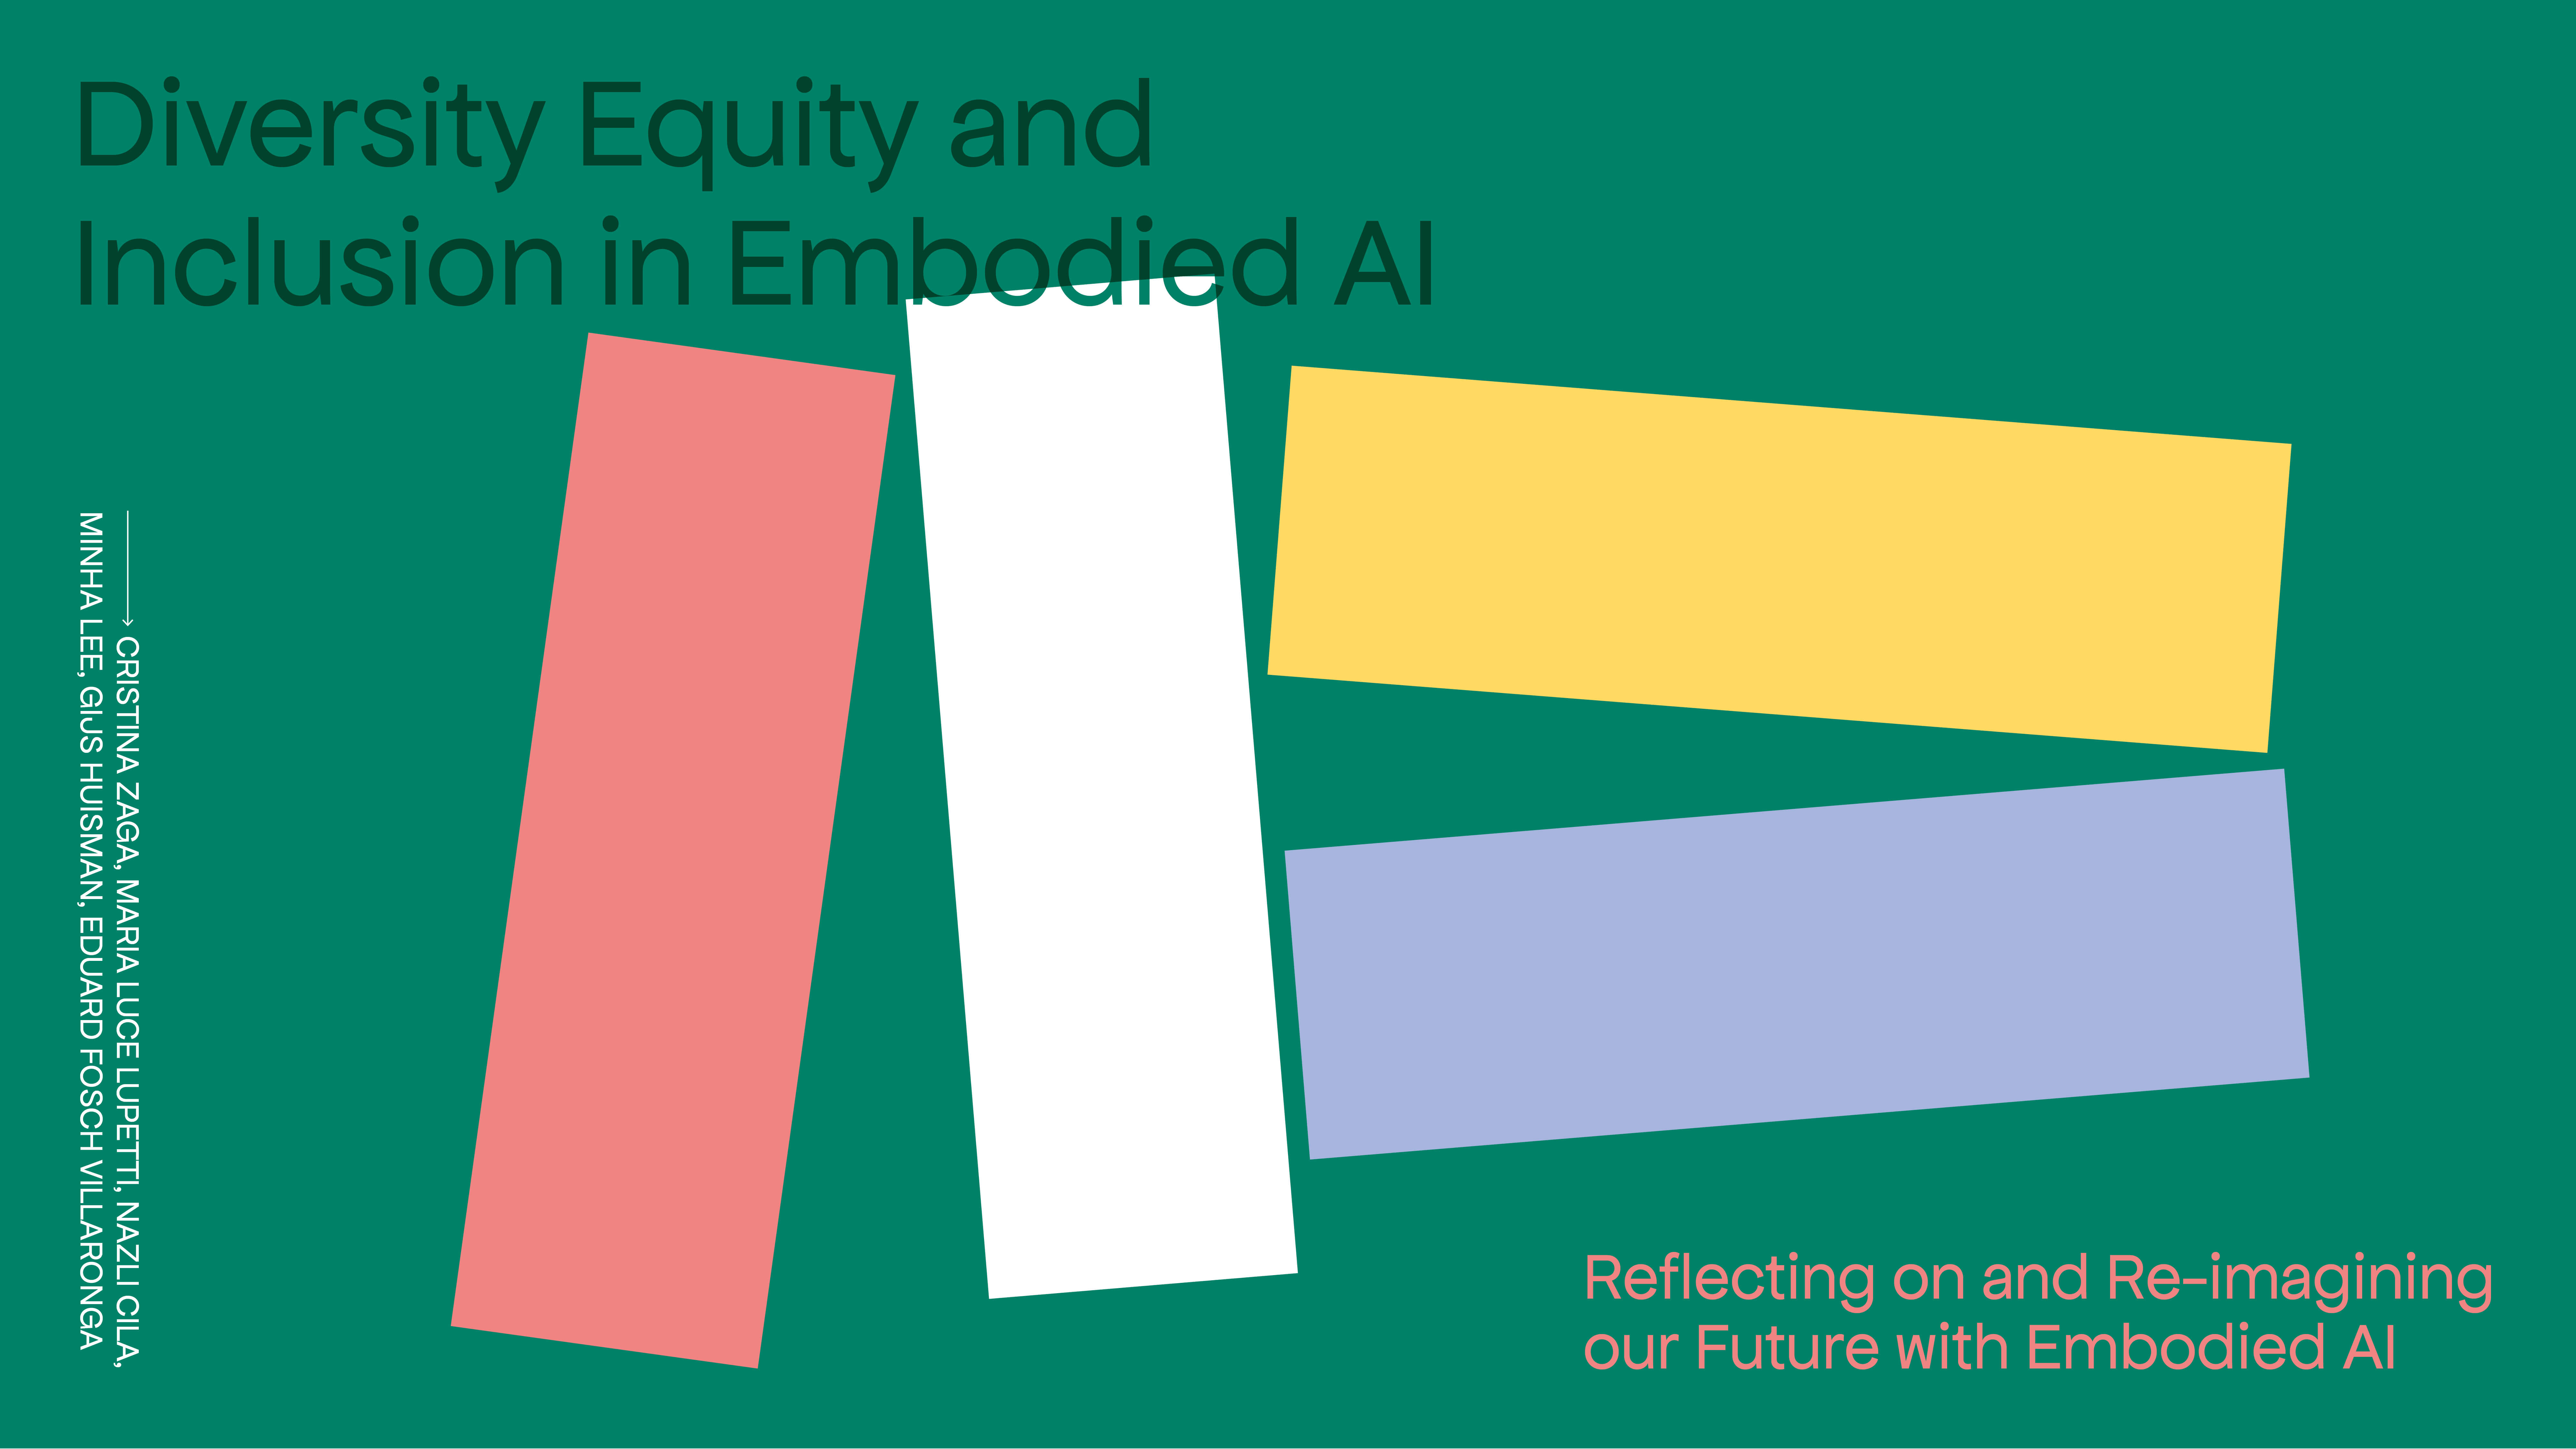 Title page of the booklet by the DEI4AI collective, which entails Diversity, Equity and Inclusion for Embodied AI.